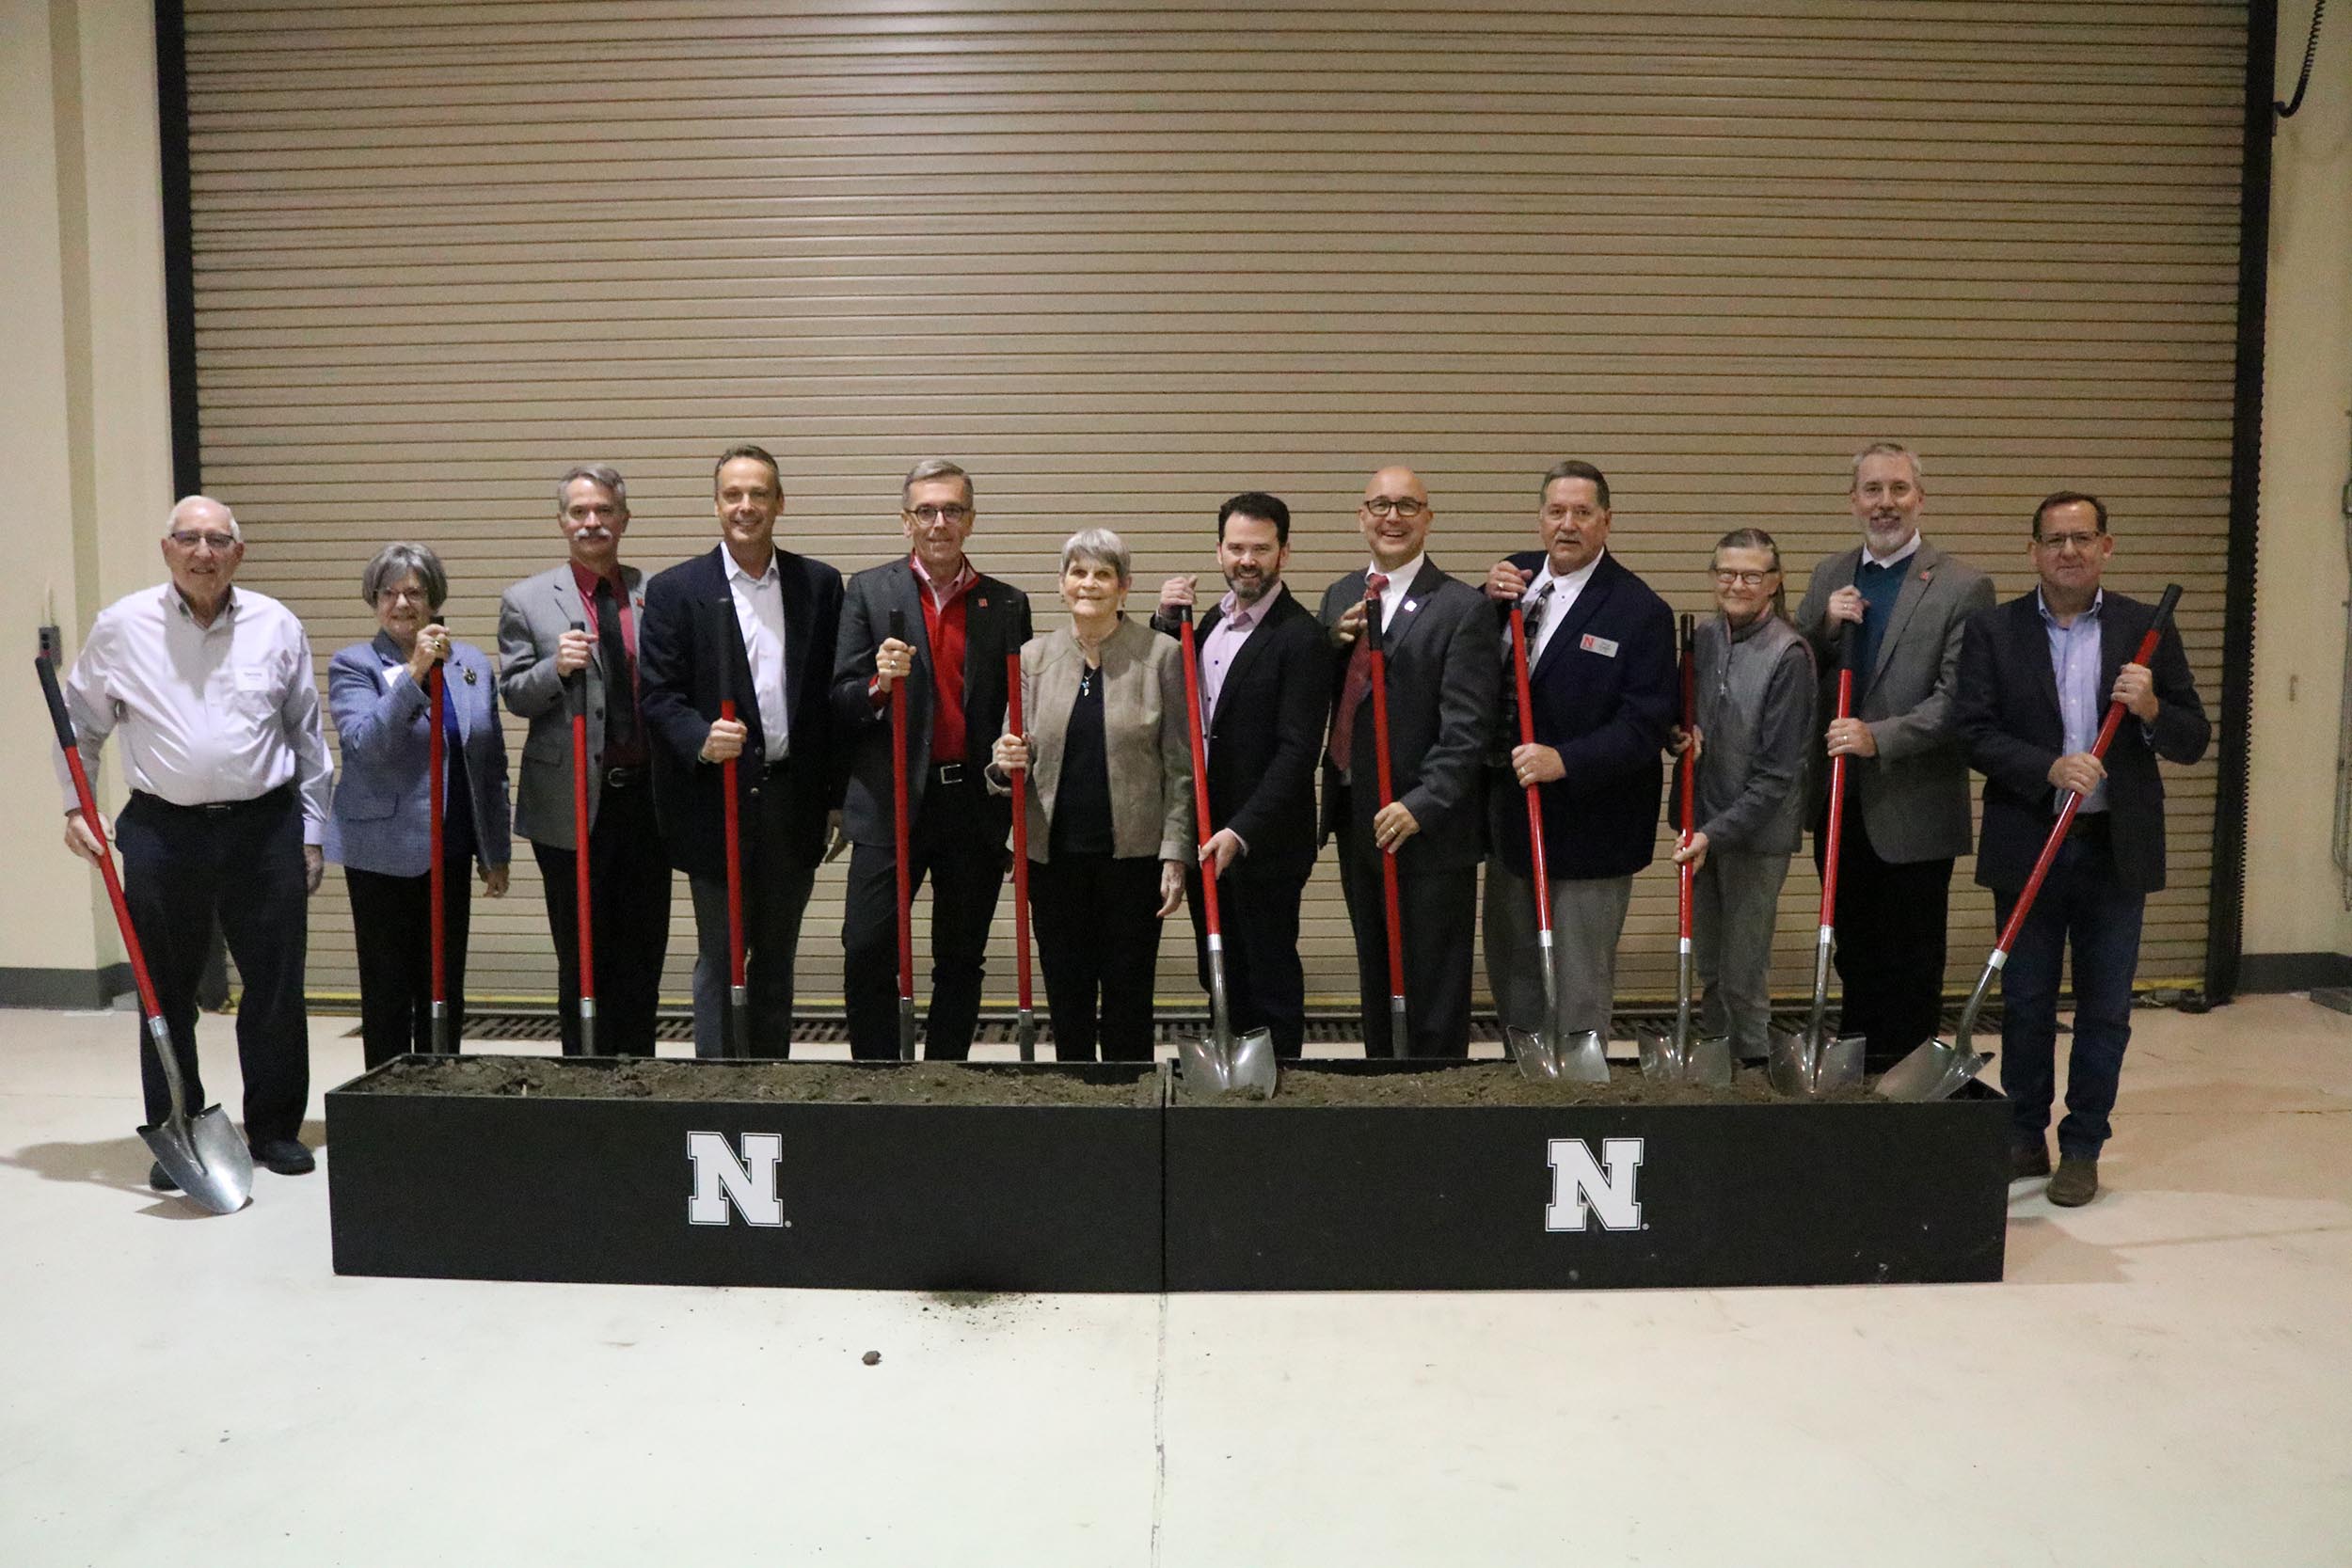 The University of Nebraska–Lincoln broke ground on its Feedlot Innovation Center near Mead on Nov. 4. Participating in the ceremony were (from left) Dennis and Glenda Boesiger; Clint Krehbiel, head of the Department of Animal Science; Mike Drury, president of Greater Omaha Packing; Chancellor Ronnie Green; Beth Klosterman; Steve Cohron, president of fed beef, JBS USA; IANR Vice Chancellor Mike Boehm;  Doug Zalesky, director of the Eastern Nebraska Research, Extension and Education Center; Nanc